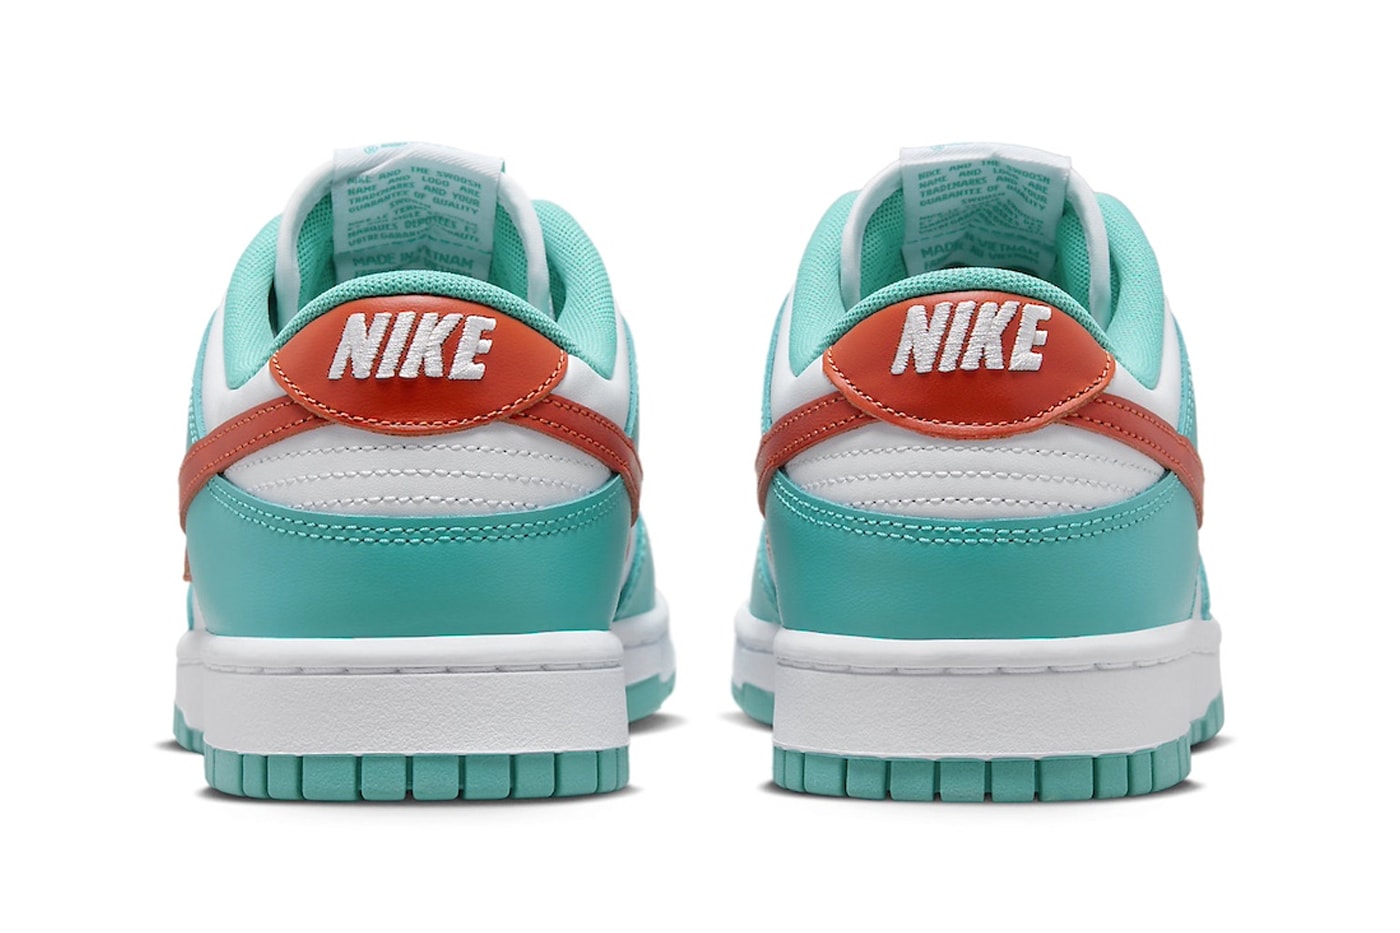 Official Look At the Nike Dunk Low "Miami Dolphins" DV0833-102 White/Dusty Cactus-Cosmic Clay release info nfl football